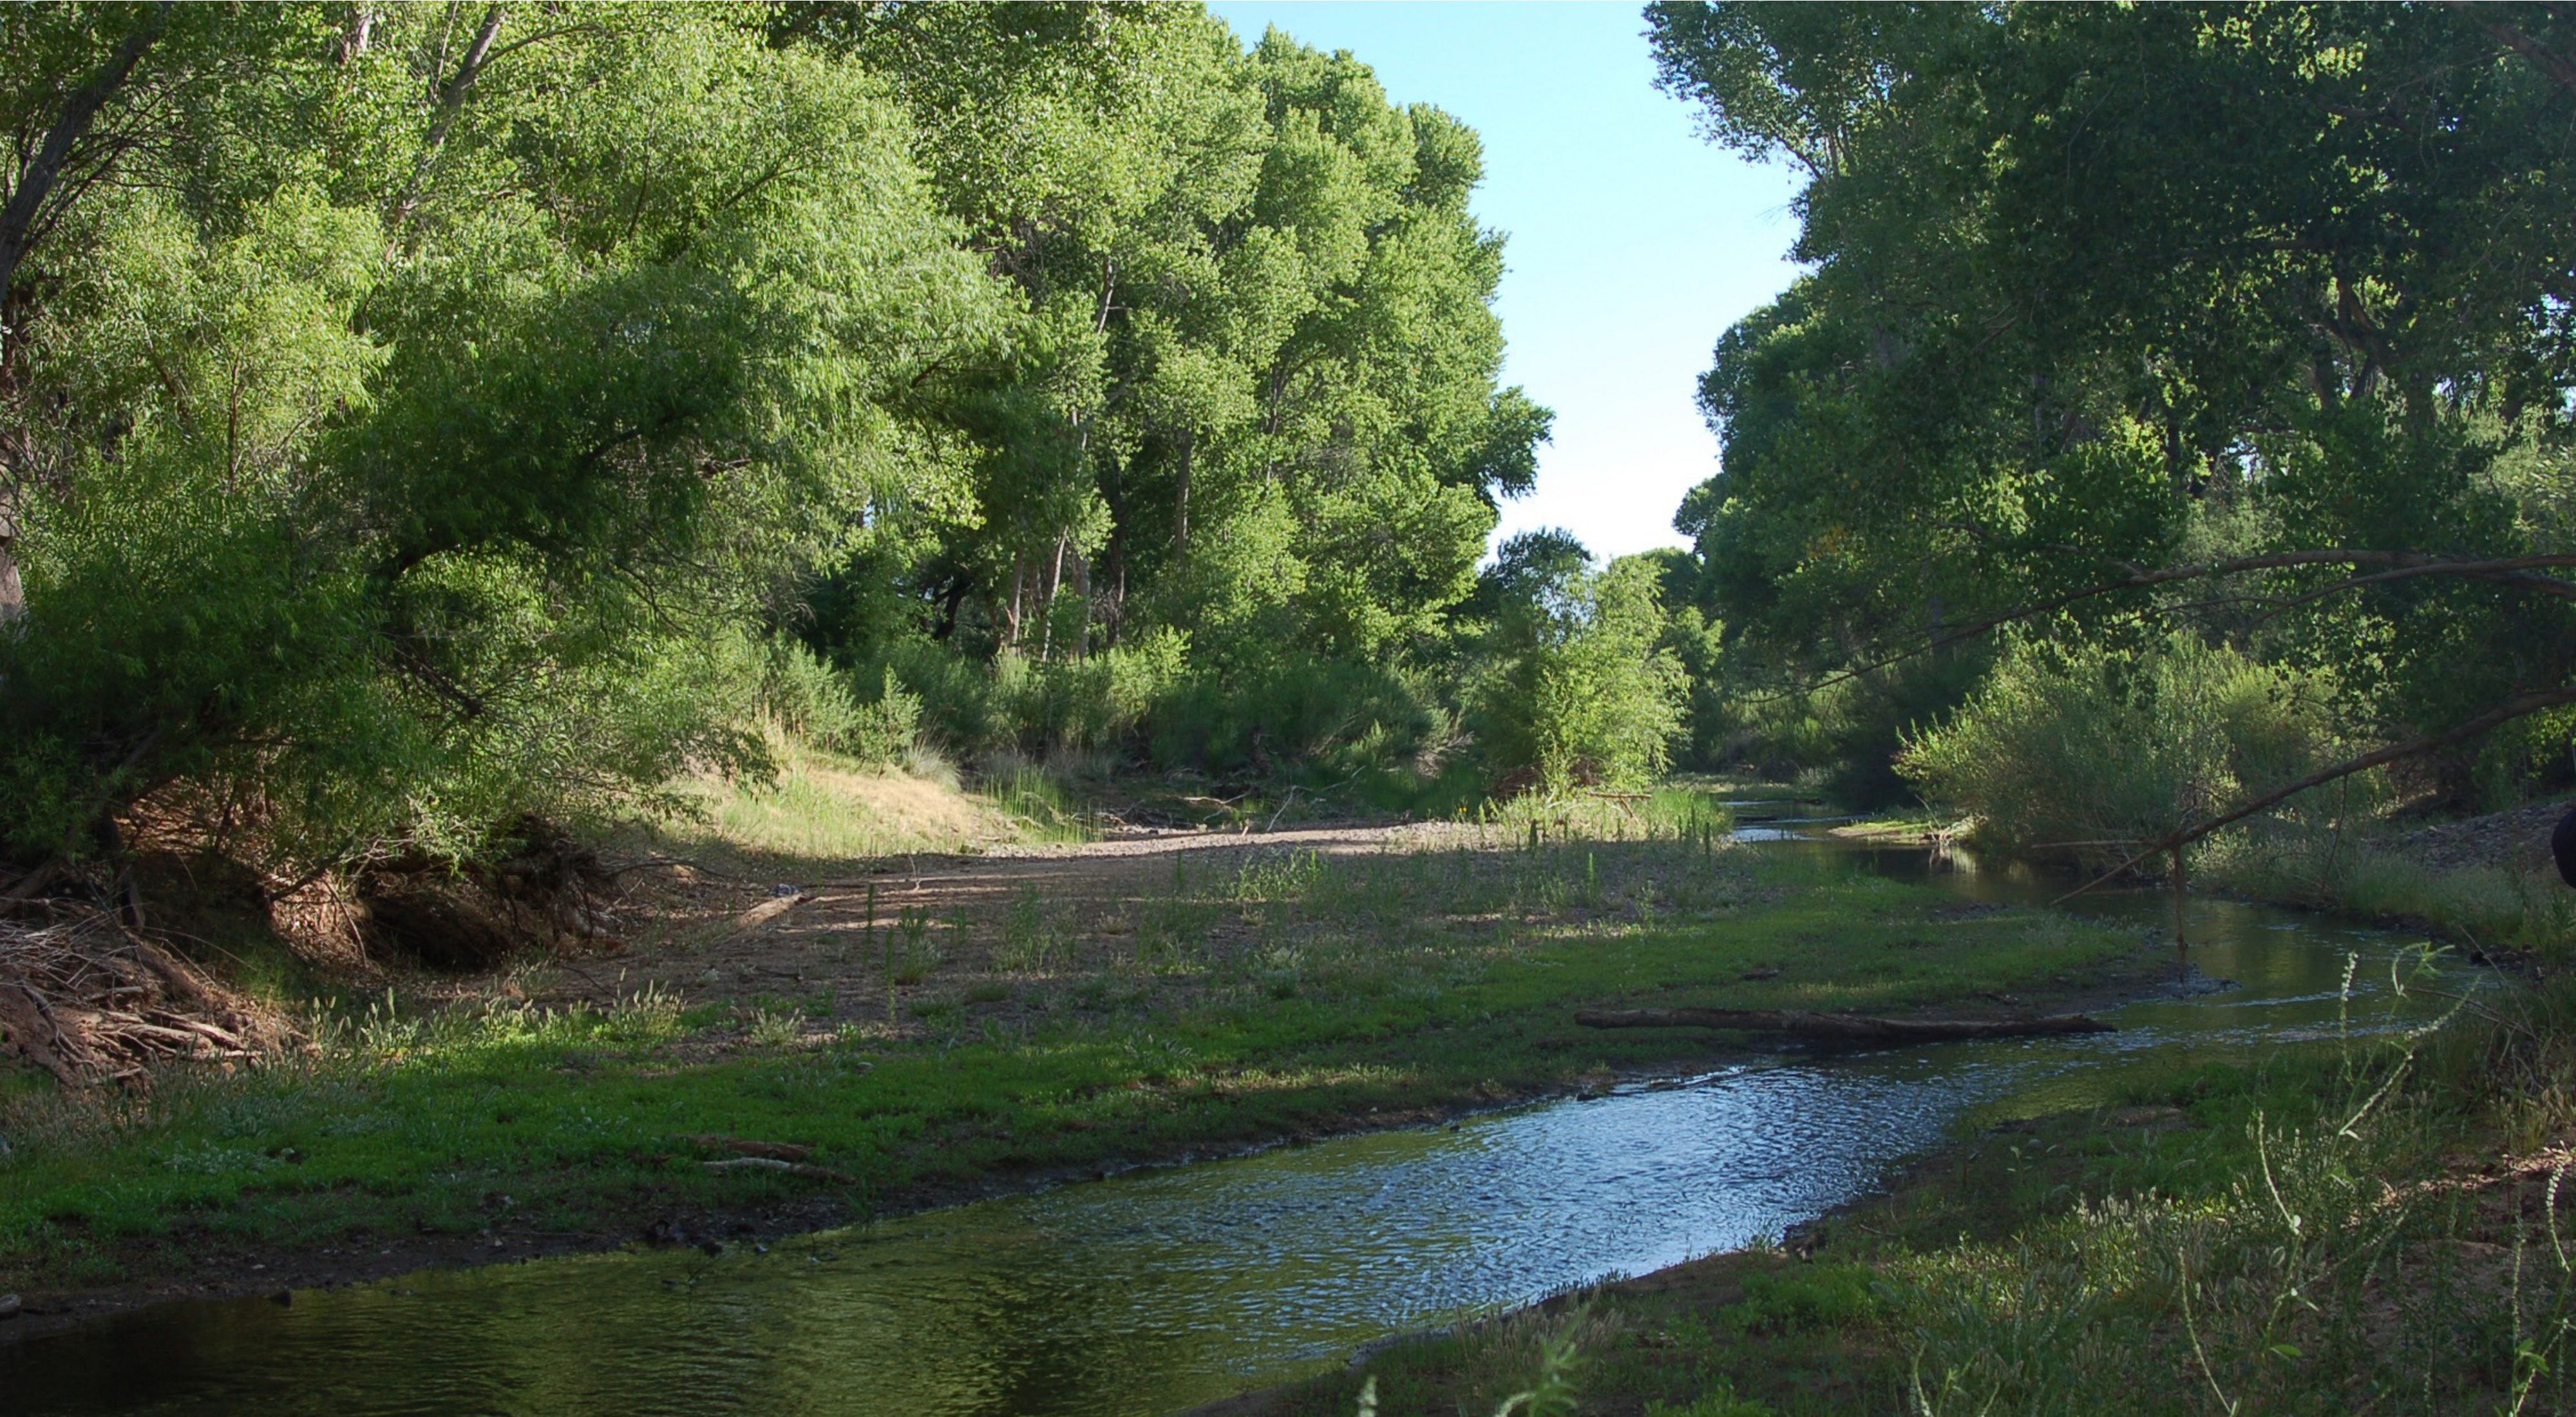 an image of the San Pedro River surrounded by green trees along its banks